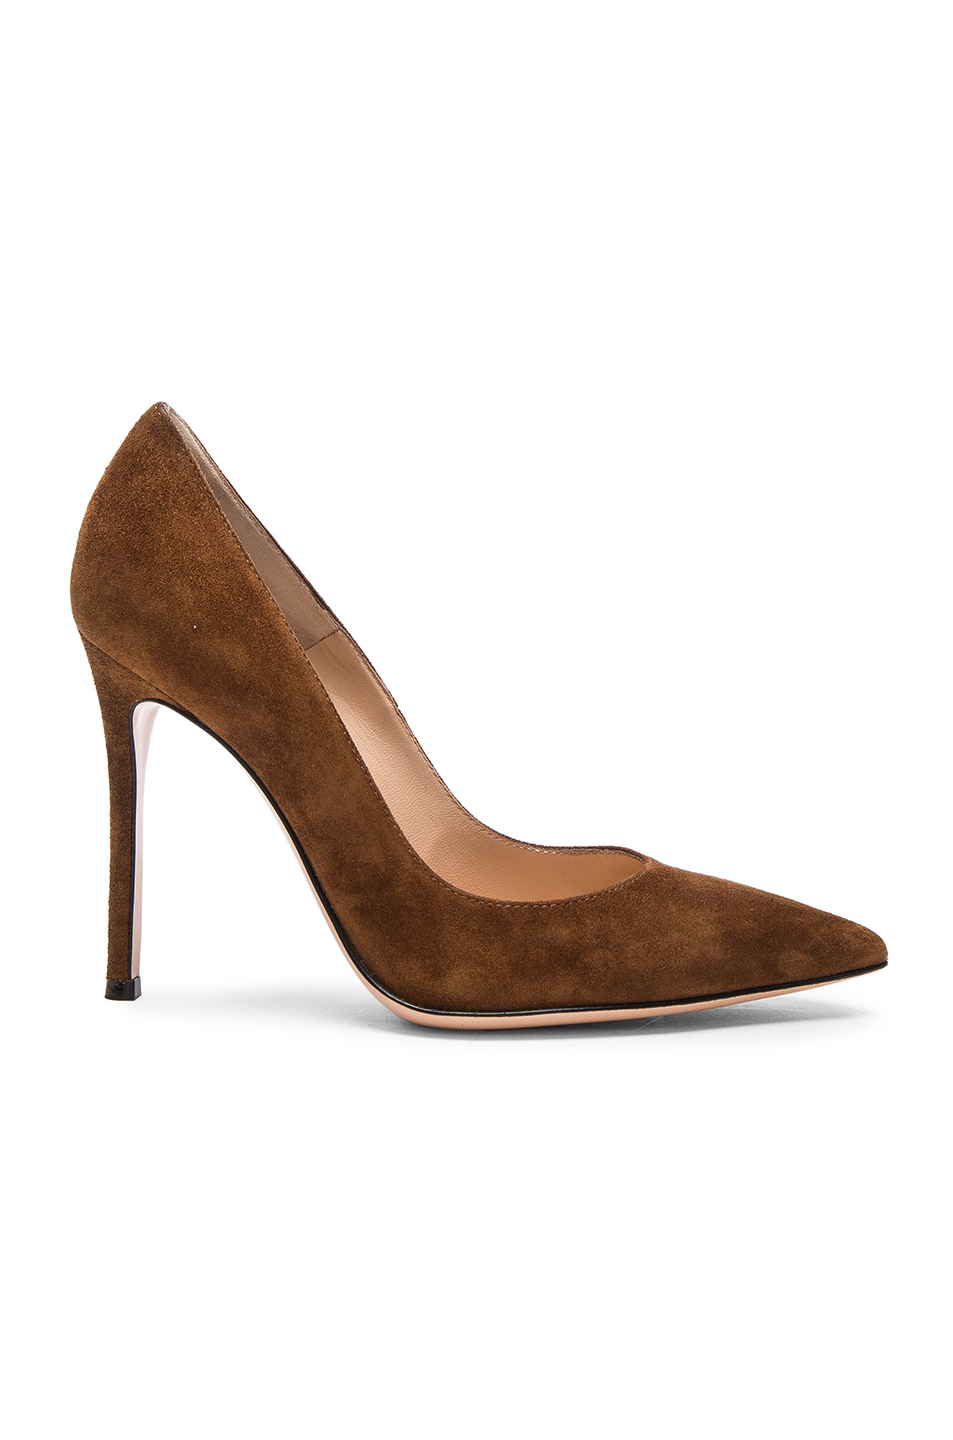 GIANVITO ROSSI Suede Pumps In Brown. in Texas | ModeSens